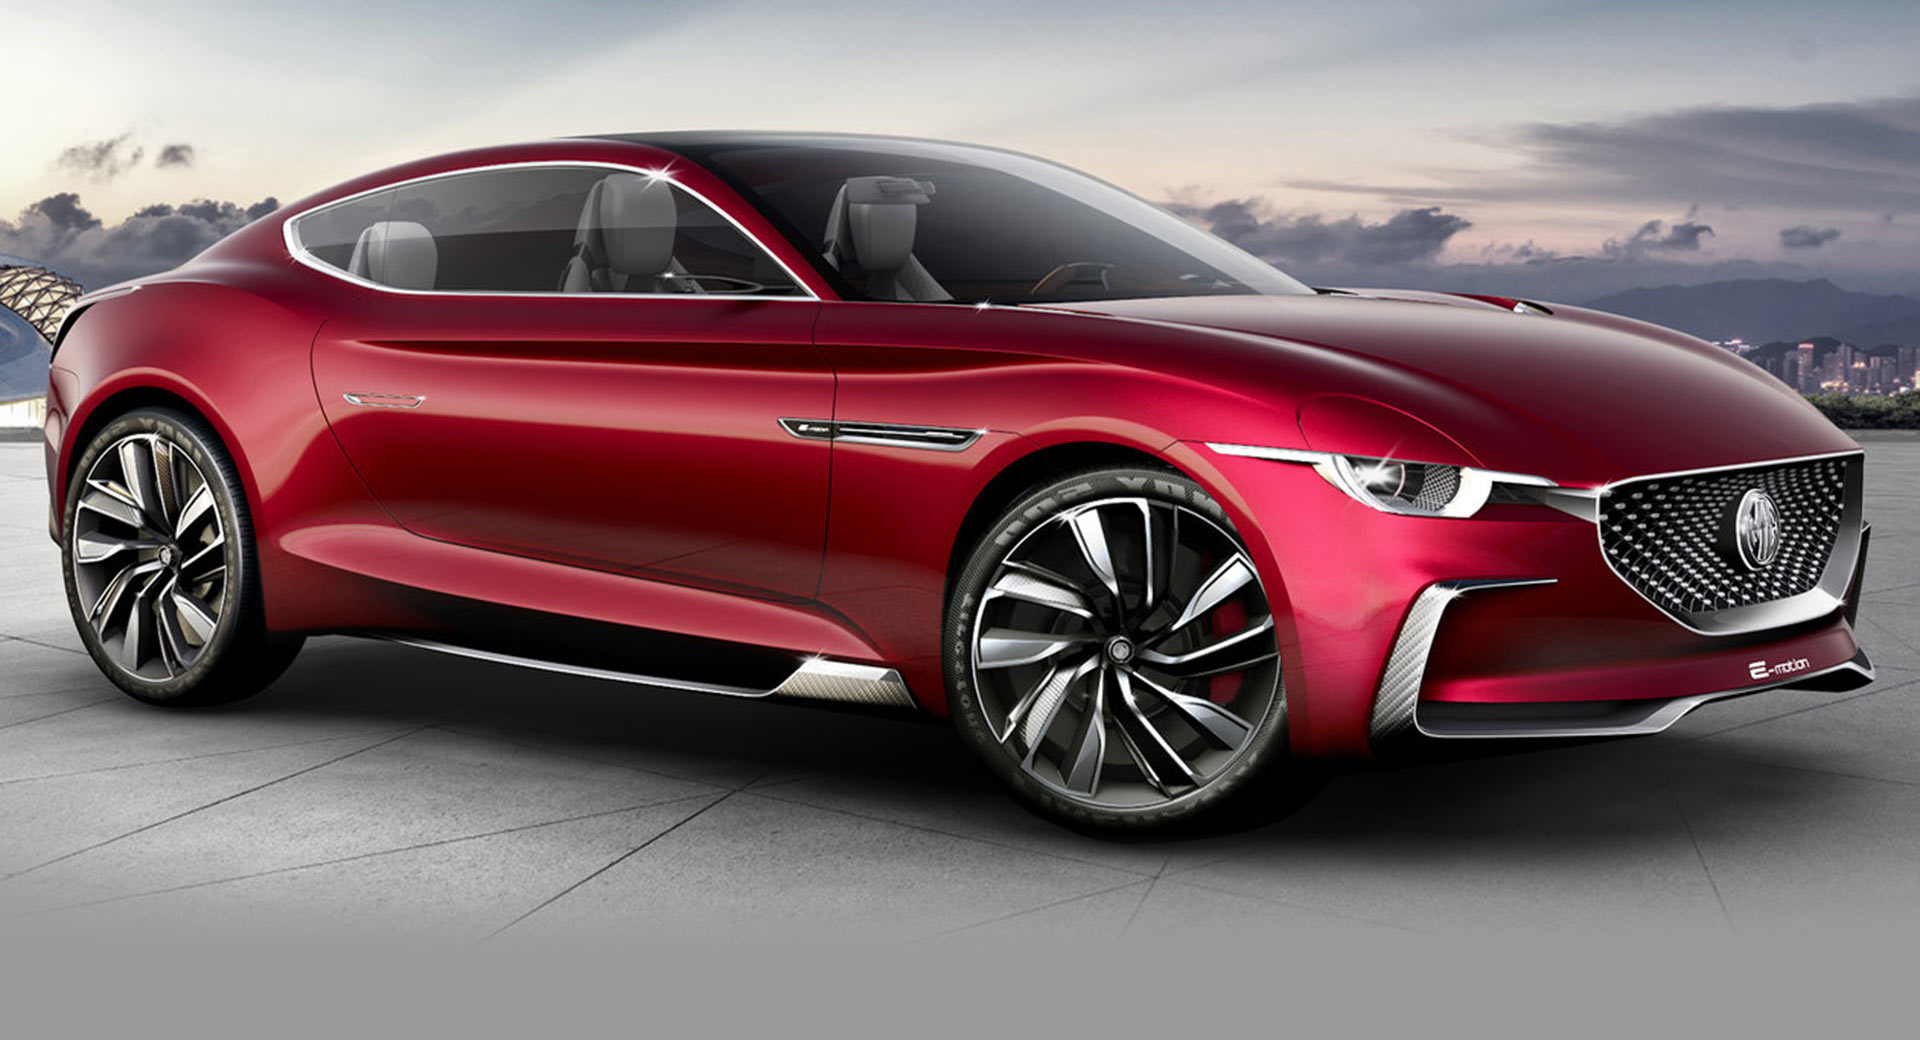 MG Readying Electric Sports Coupe That’ll Launch This Year? Carscoops